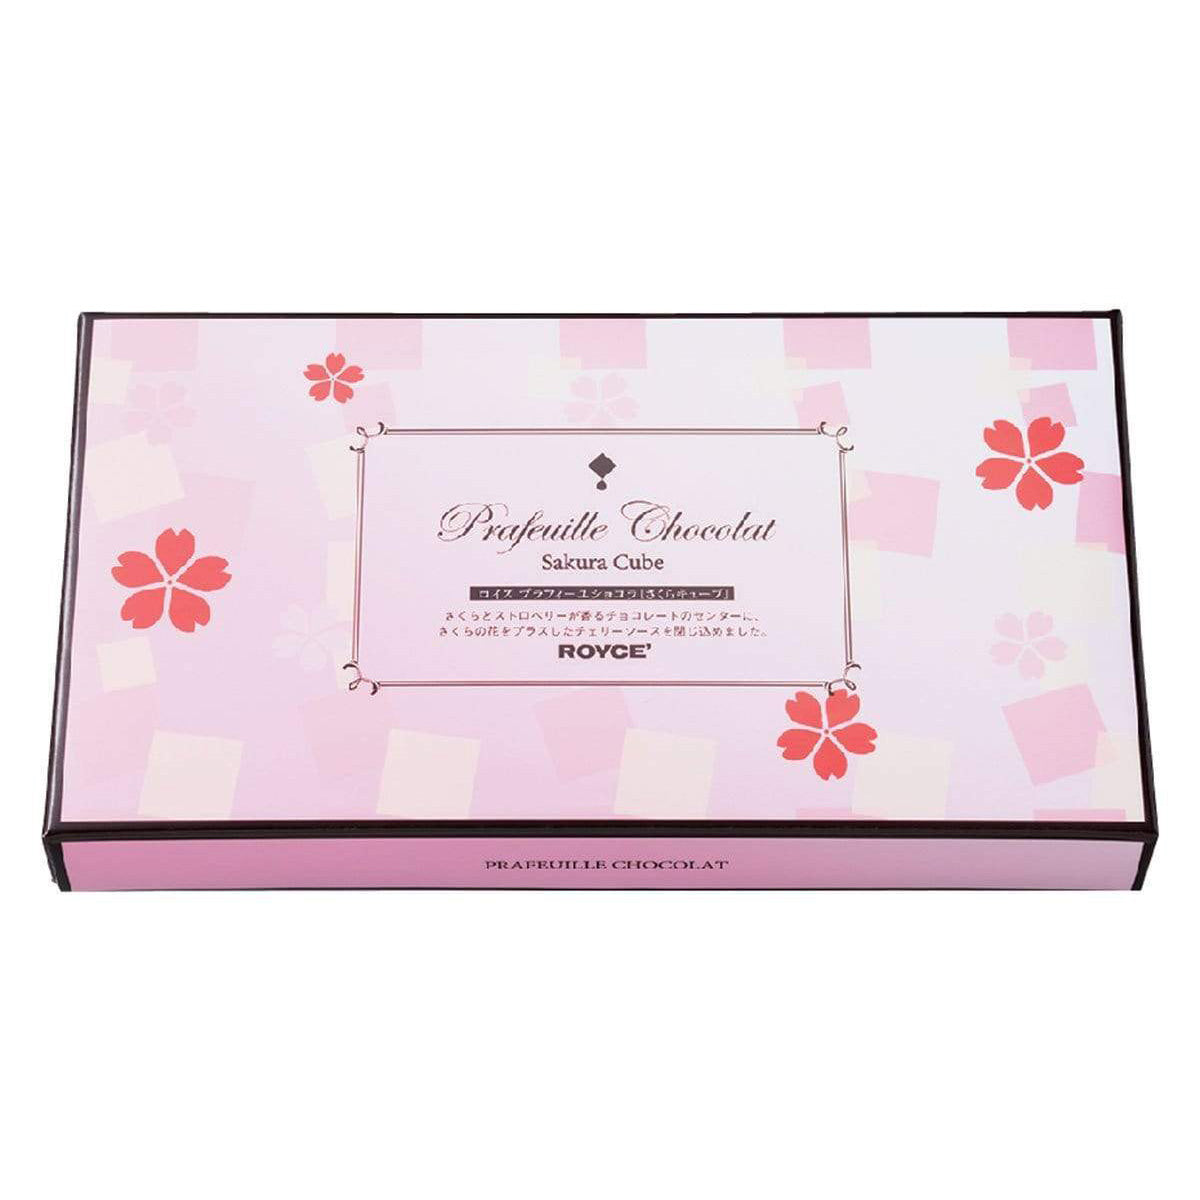 ROYCE' Chocolate - Prafeuille Chocolat "Sakura Cube" - Image shows a pink box with cube and floral prints. Text says Prafeuille Chocolat Sakura Cube ROYCE'. Text below says Prafeuille Chocolat.